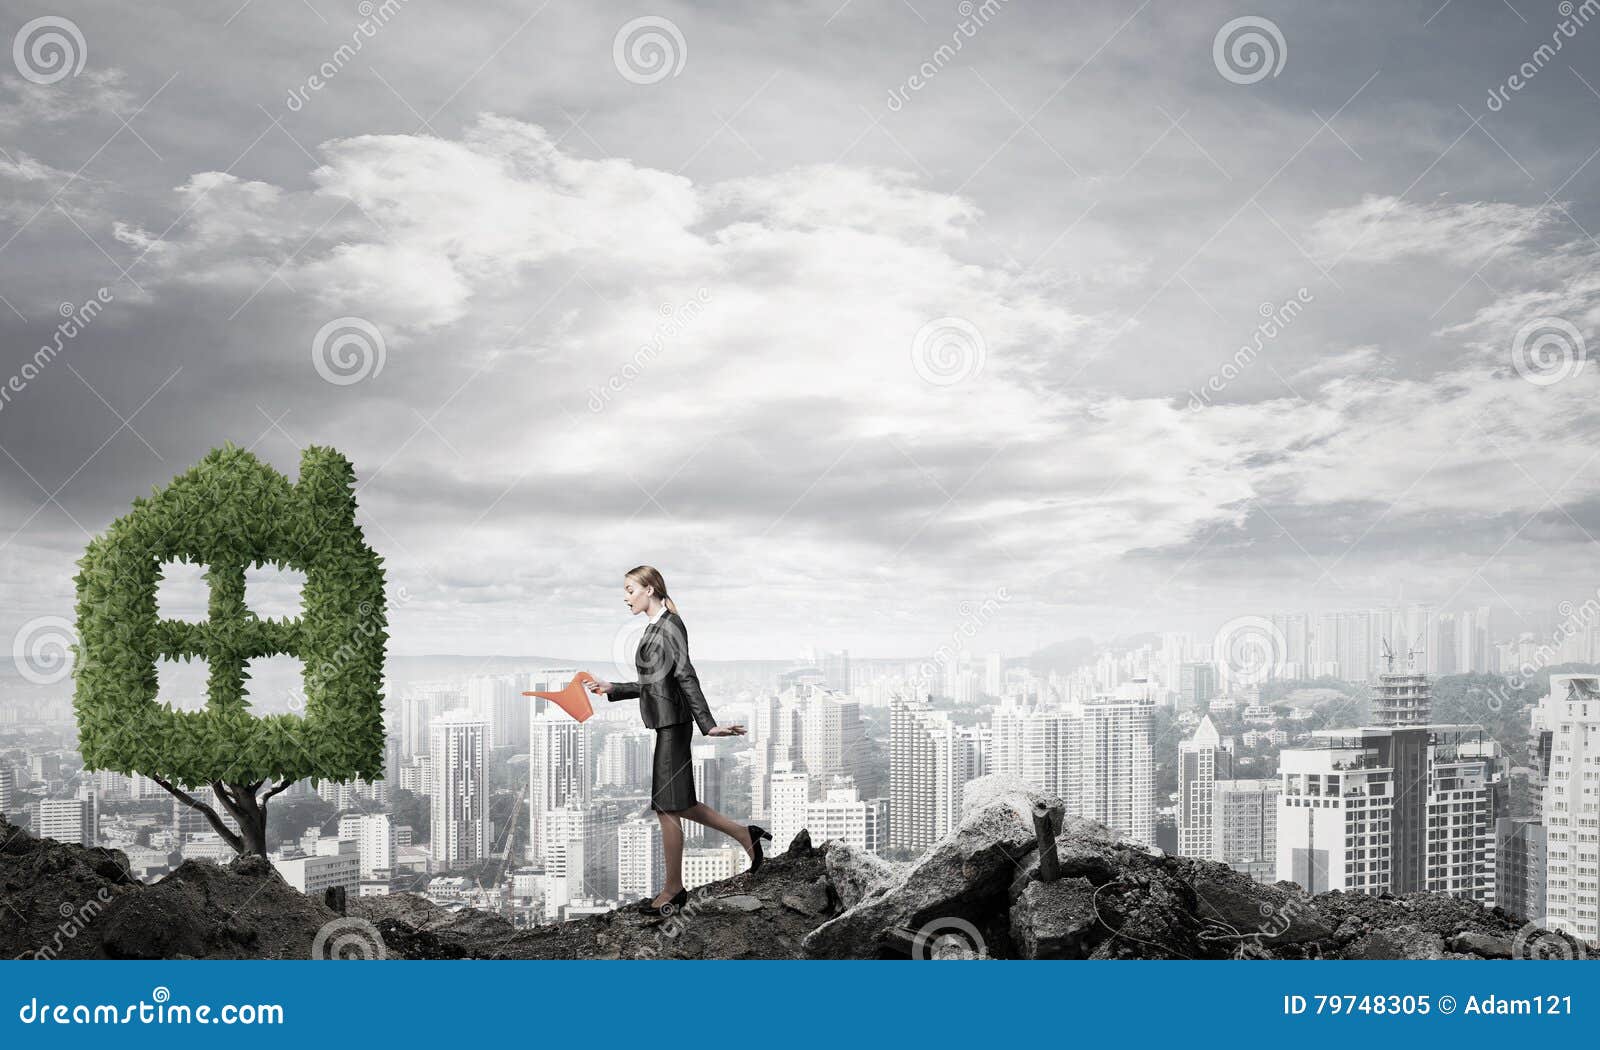 Make your money grow stock image. Image of invest, businesswoman - 79748305